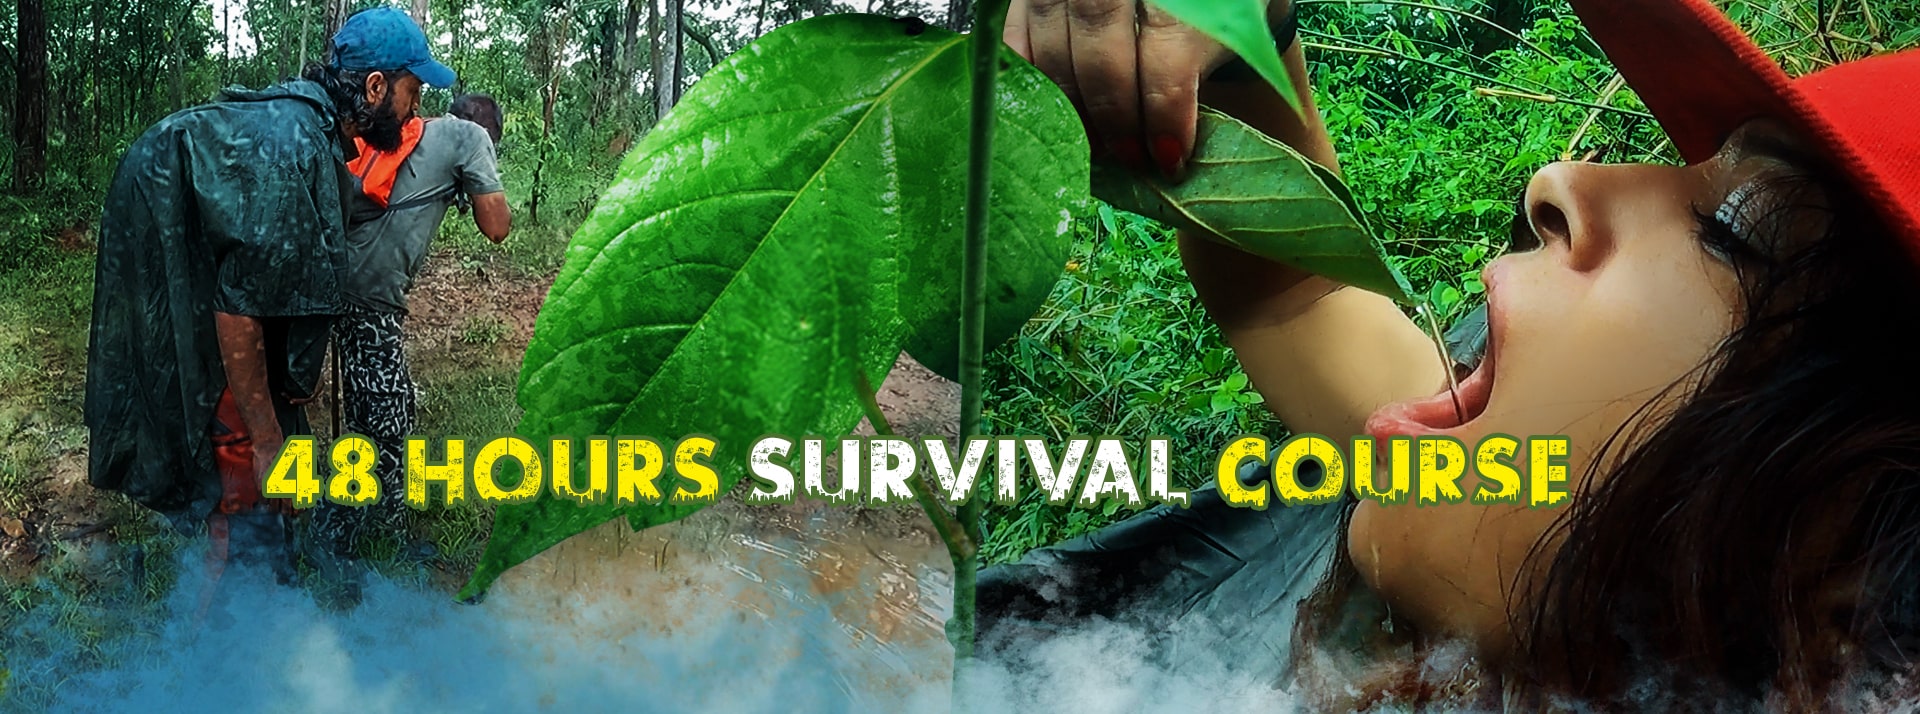 60 Day Survival Challenge  Survival Alone In The Rainforest 